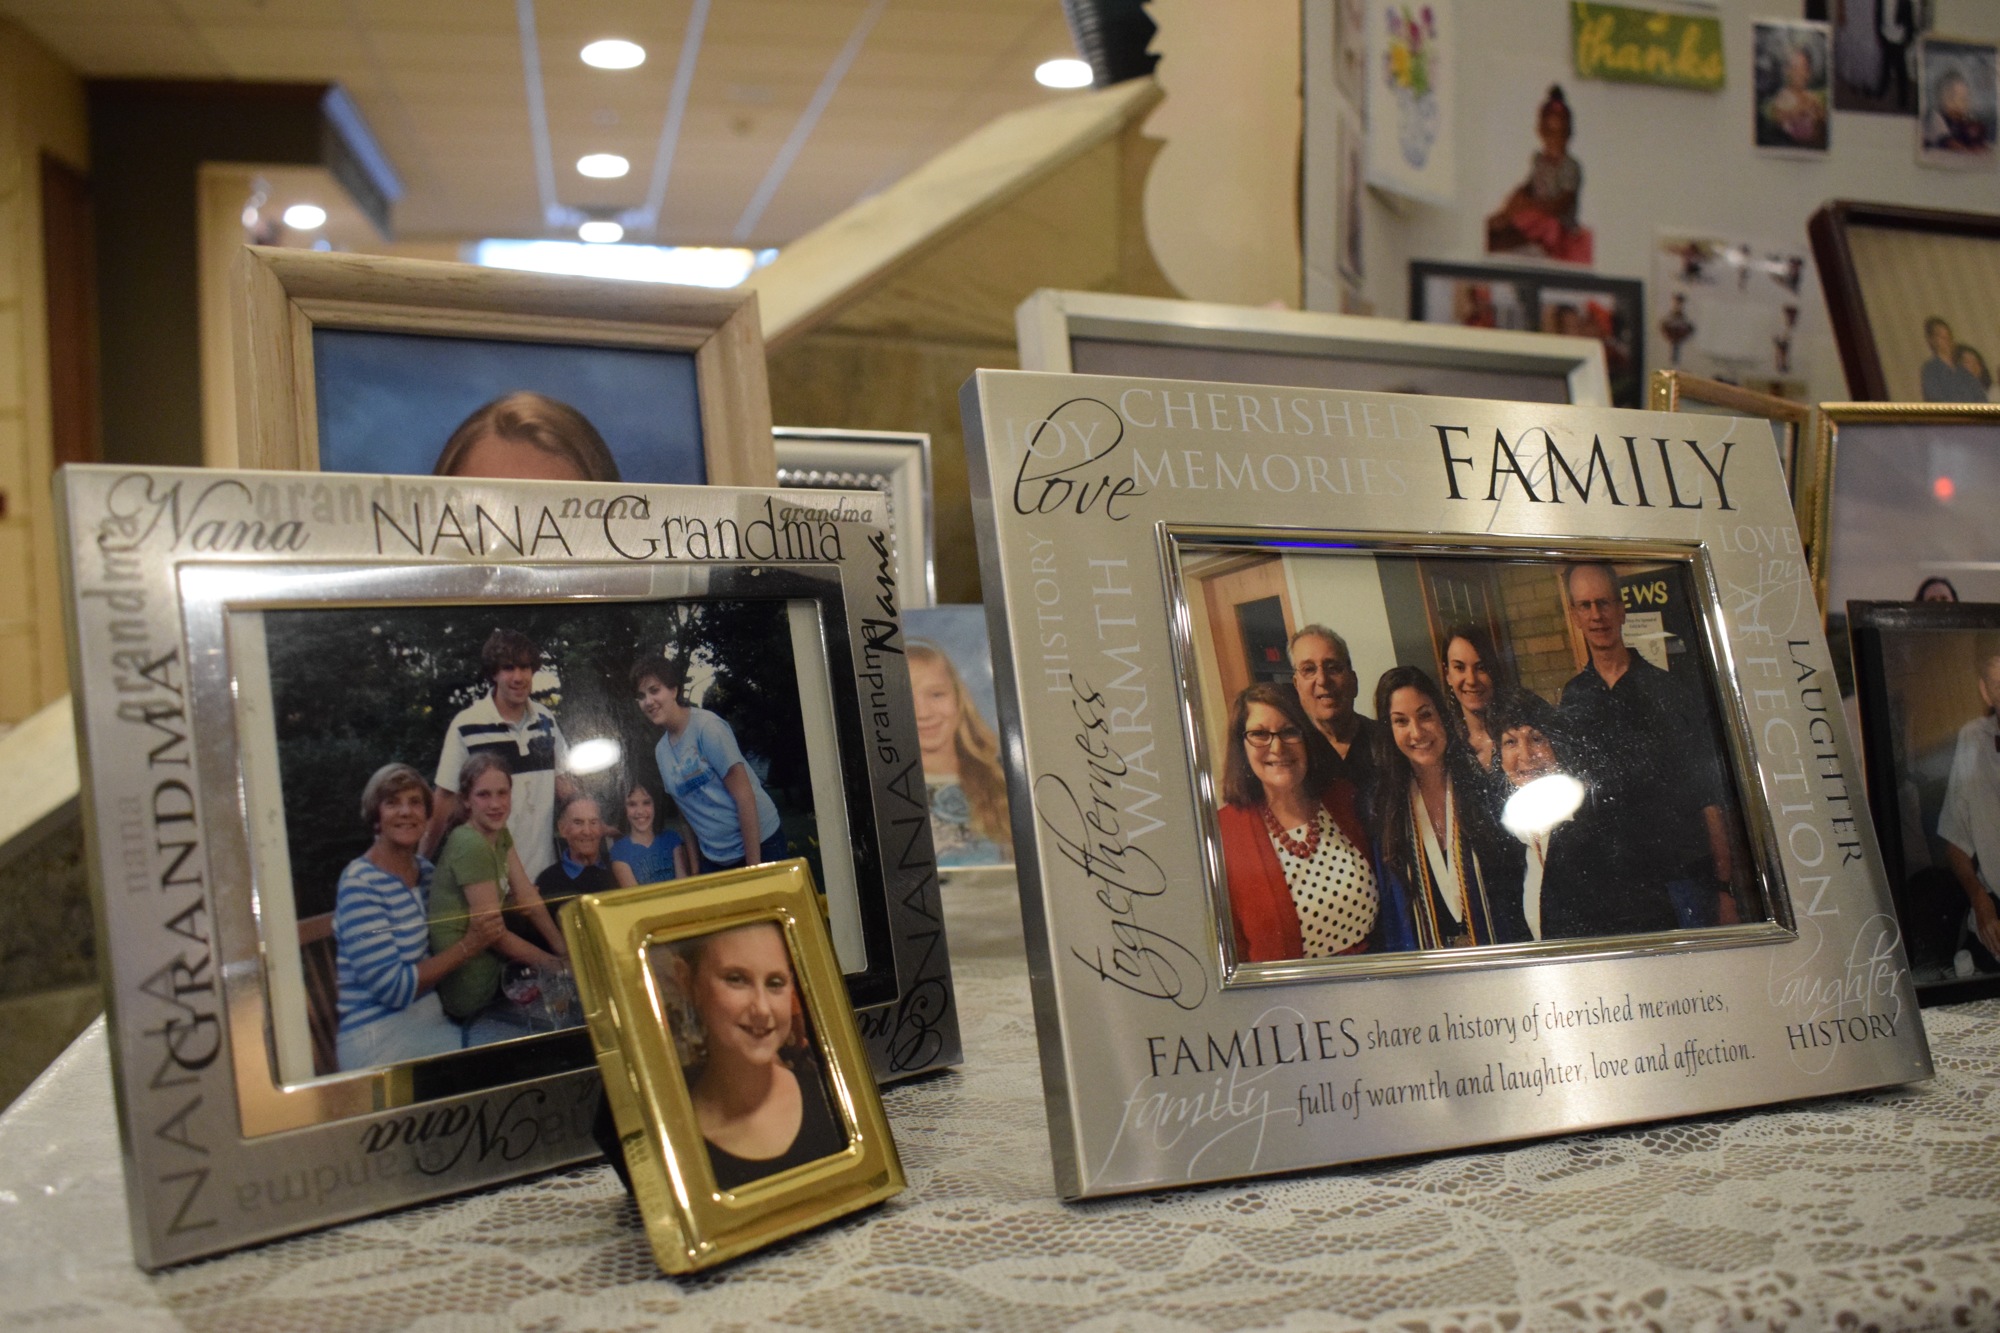 Family photos are on display at Stone River Retirement Community to celebrate National Grandparents Day since children under 18 years old aren't allowed to visit yet.